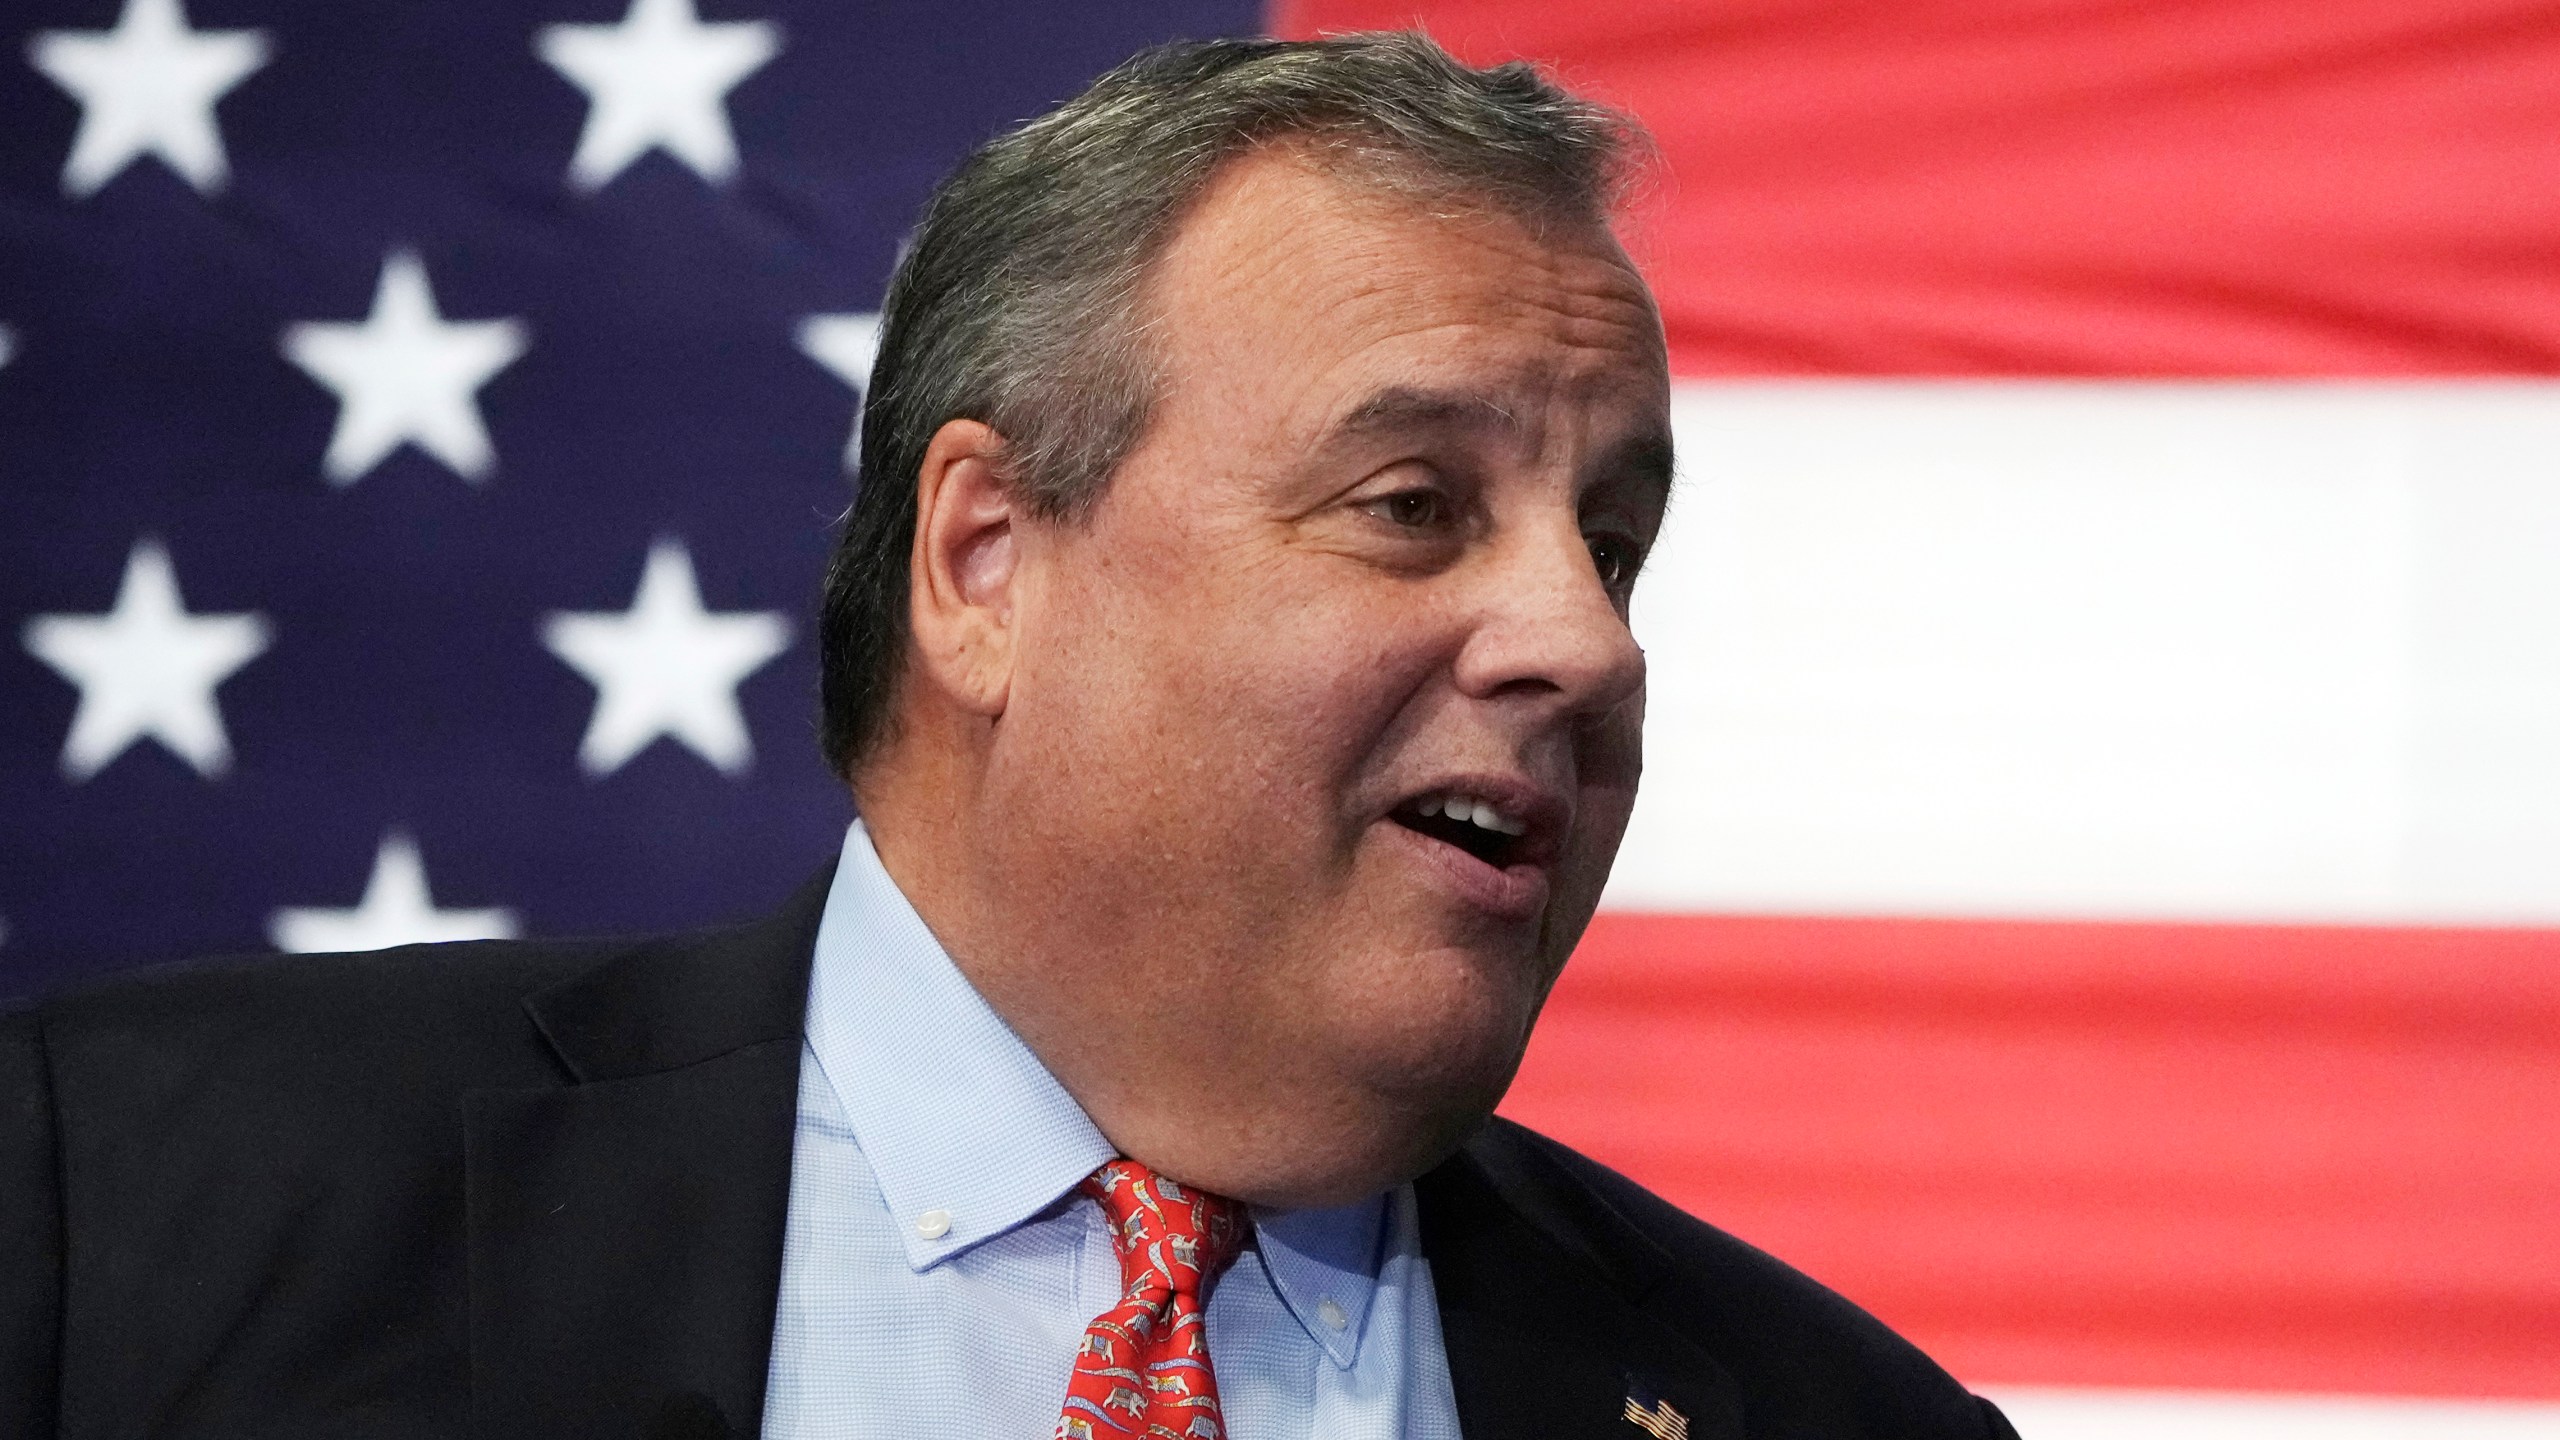 Republican Presidential candidate former, New Jersey Gov. Chris Christie smiles during a gathering, Tuesday, June 6, 2023, in Manchester, N.H. Christie filed paperwork Tuesday formally launching his bid for the Republican nomination for president after casting himself as the only candidate willing to directly take on former President Donald Trump. (AP Photo/Charles Krupa)